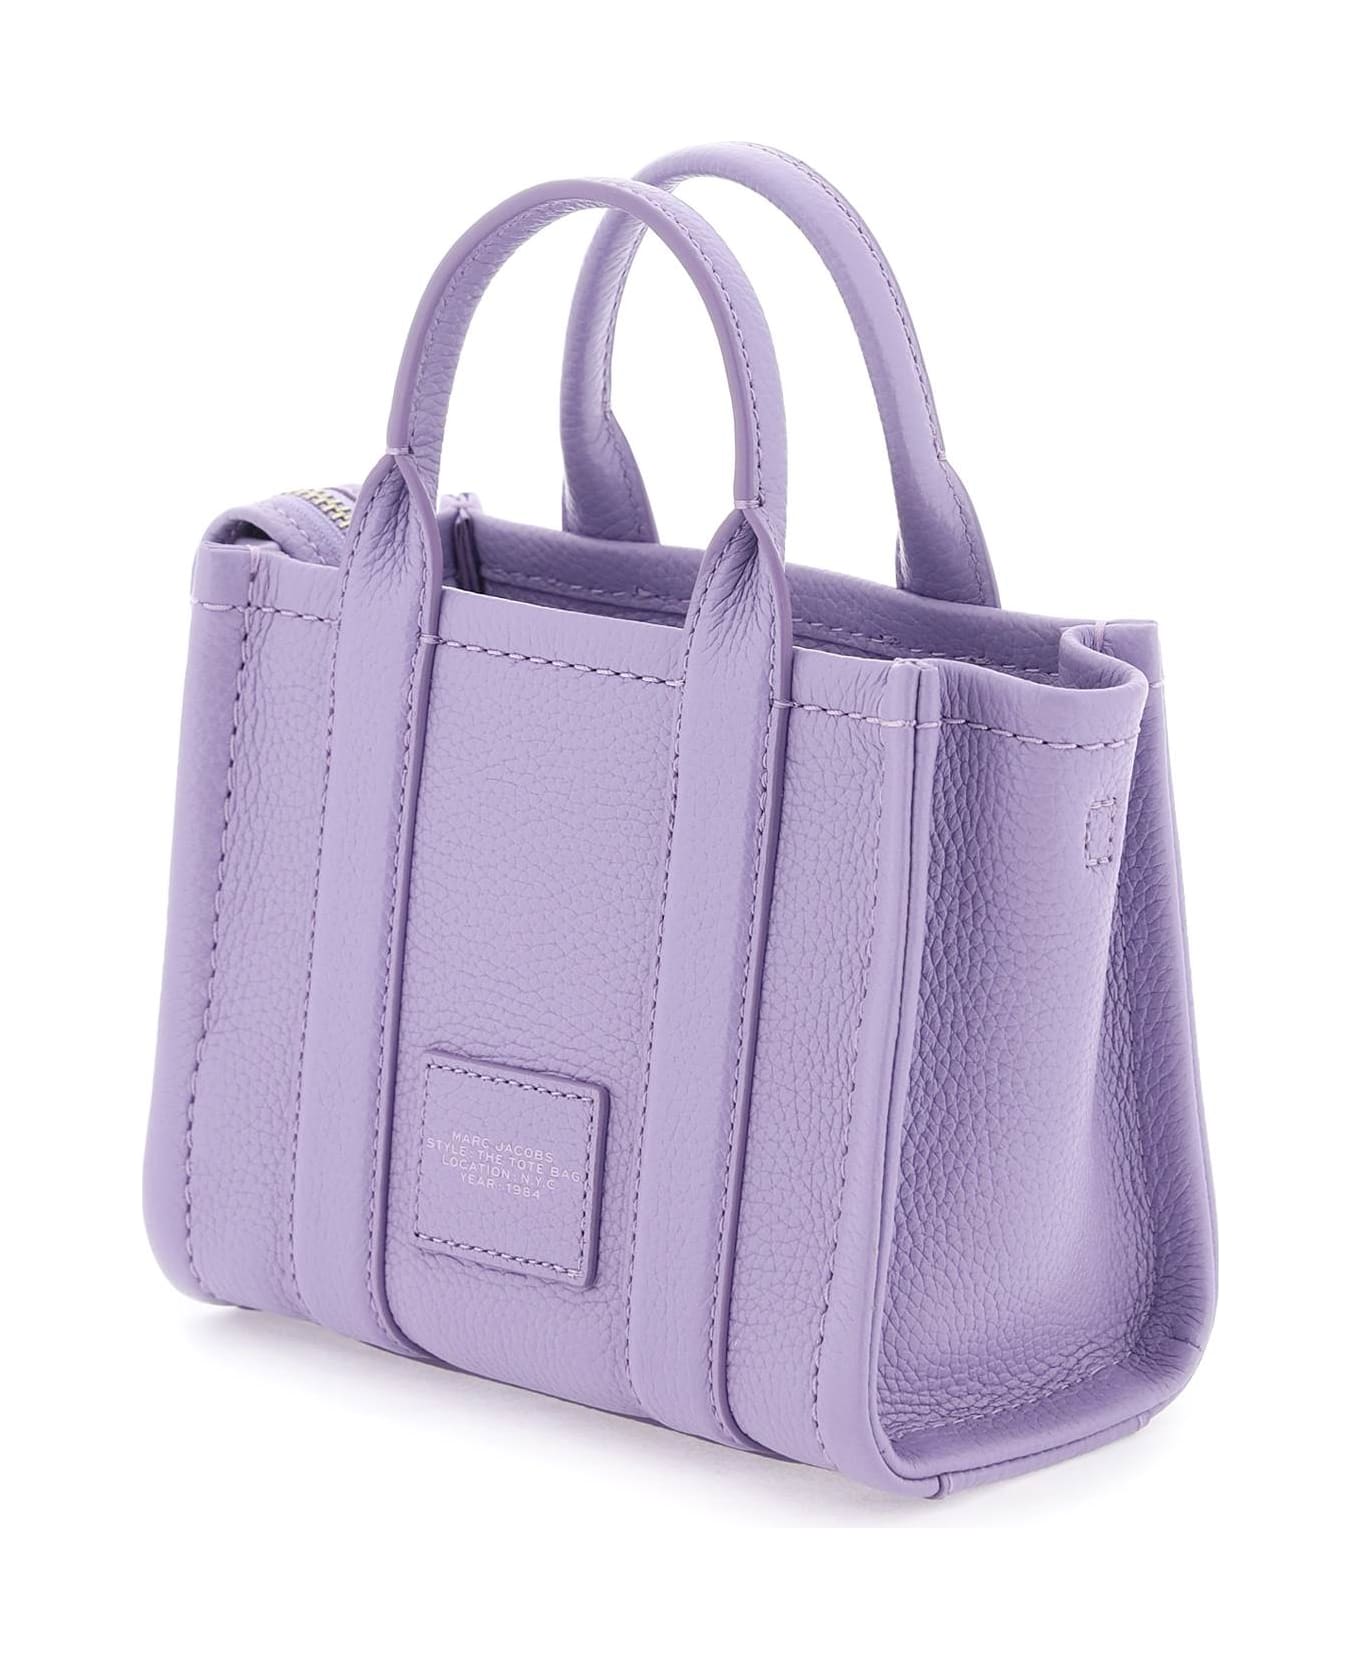 Marc Jacobs The Leather Tote Bag - LAVENDER (Purple)